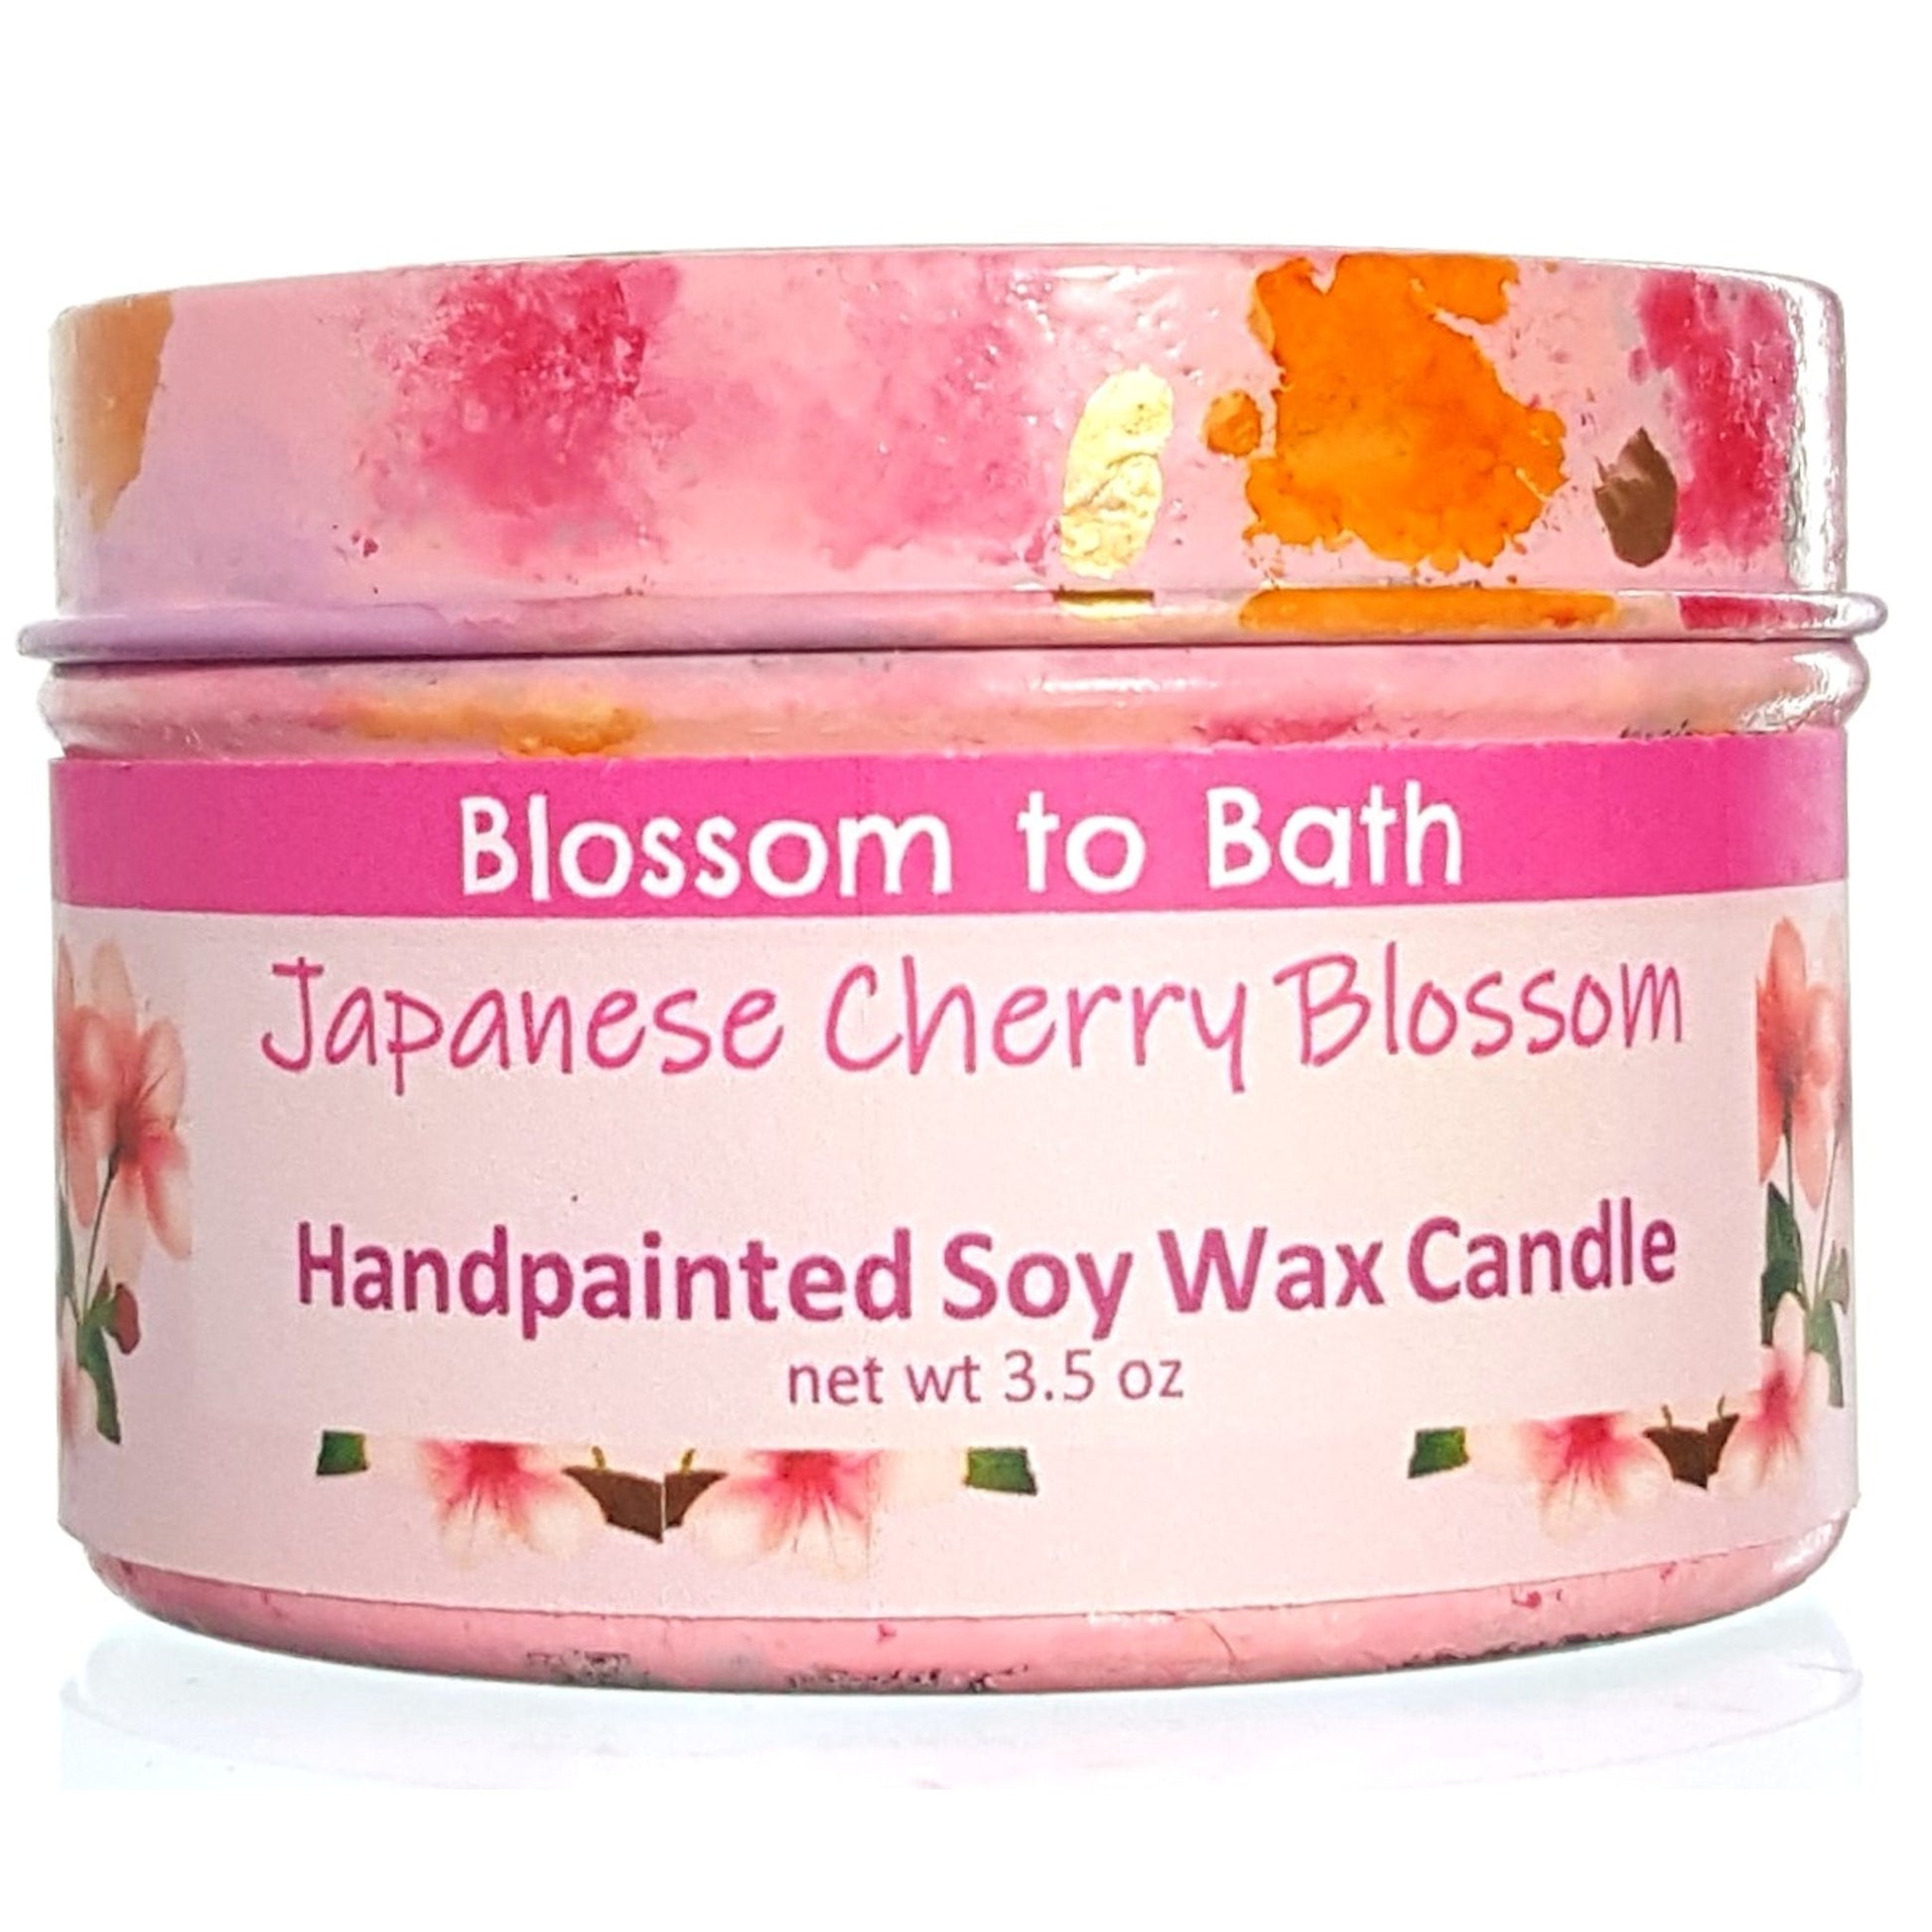 Japanese Cherry Blossom Fragrance Oil (Our Version of Bath & Body Works)